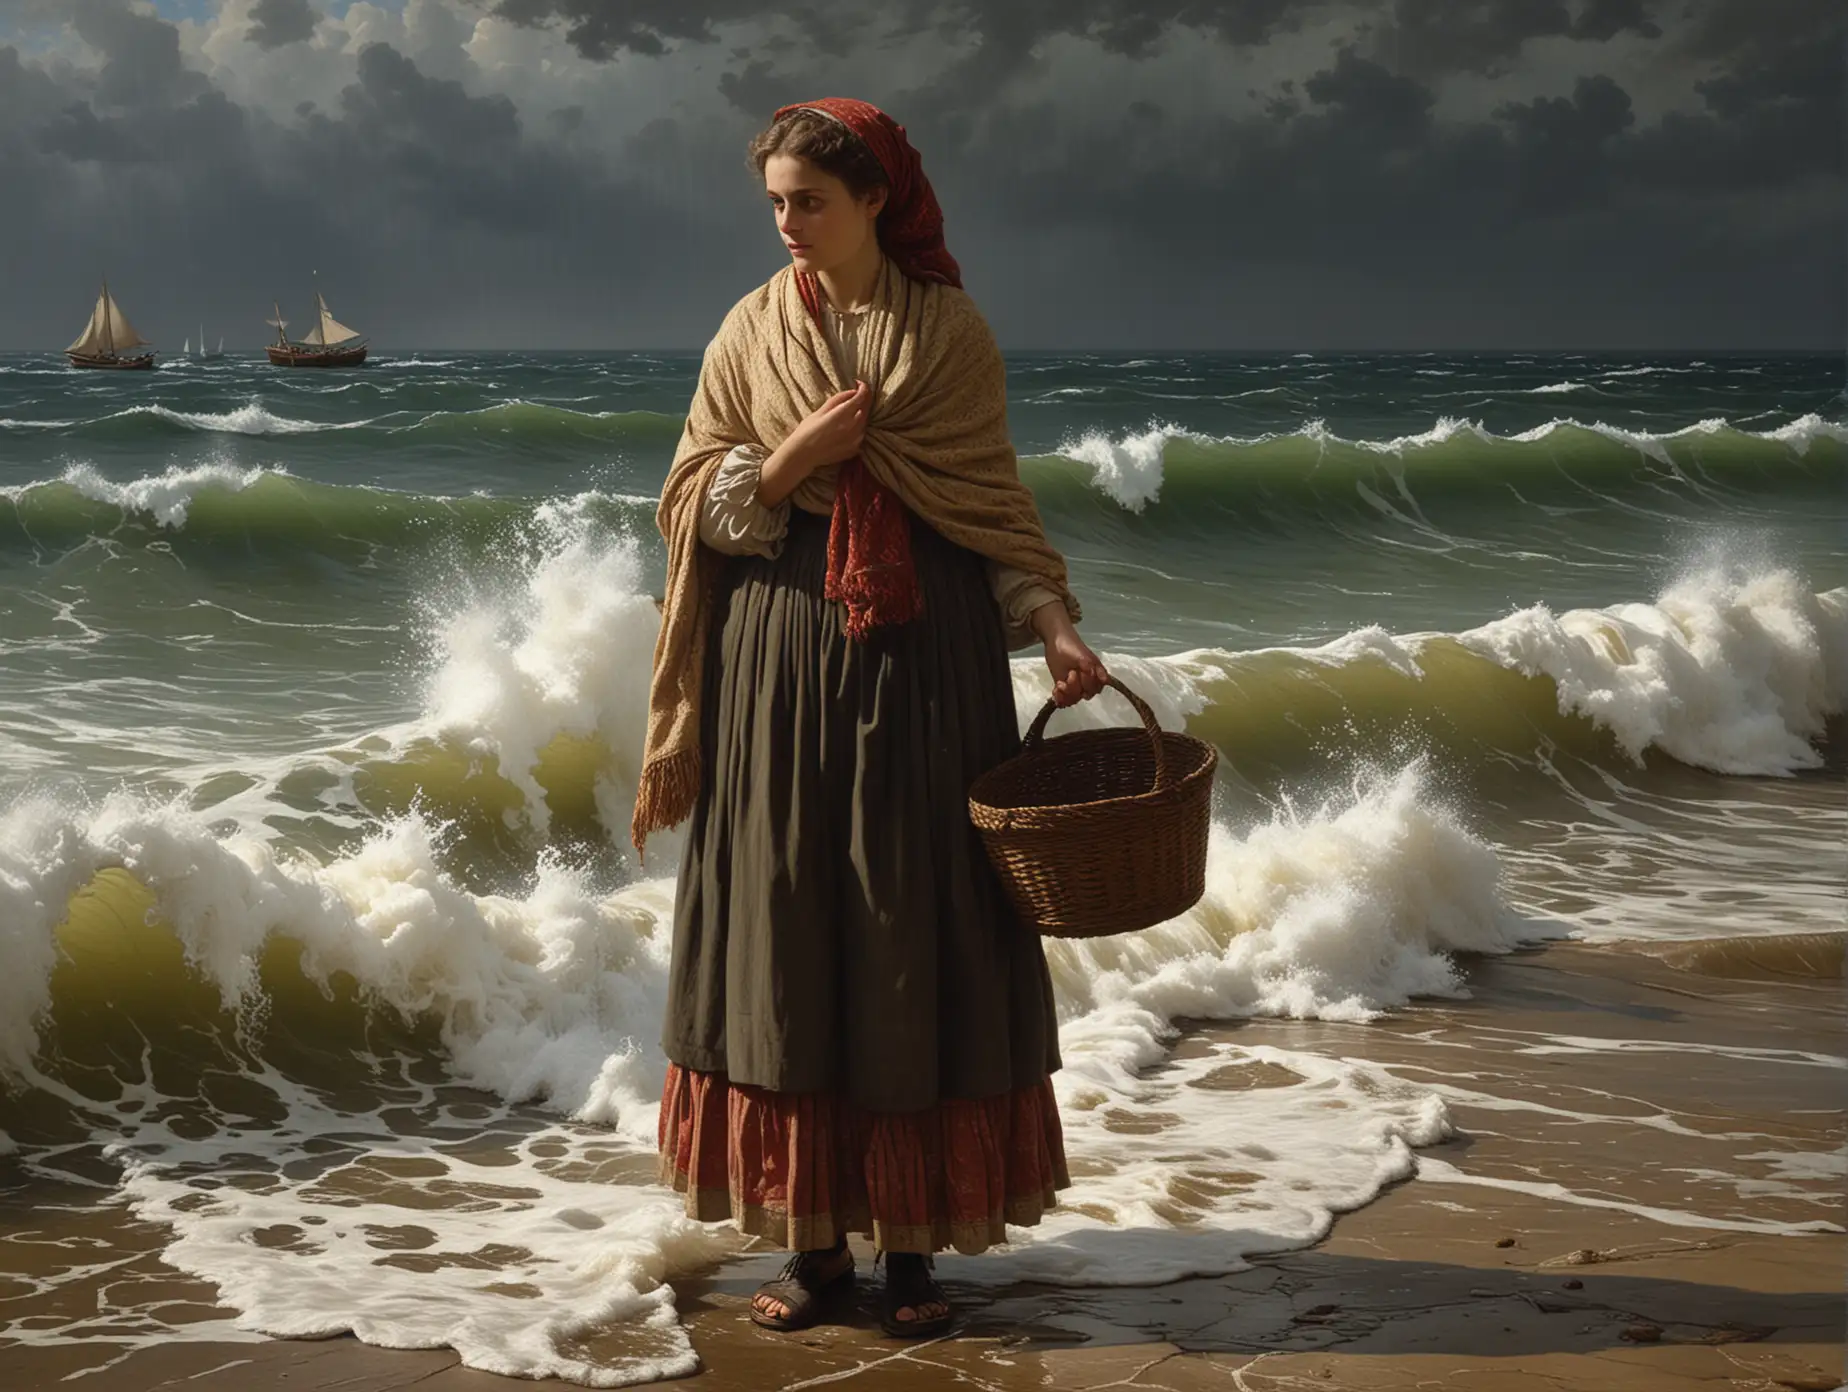 Dramatic Portrait of a Young Woman Amidst Stormy Seas